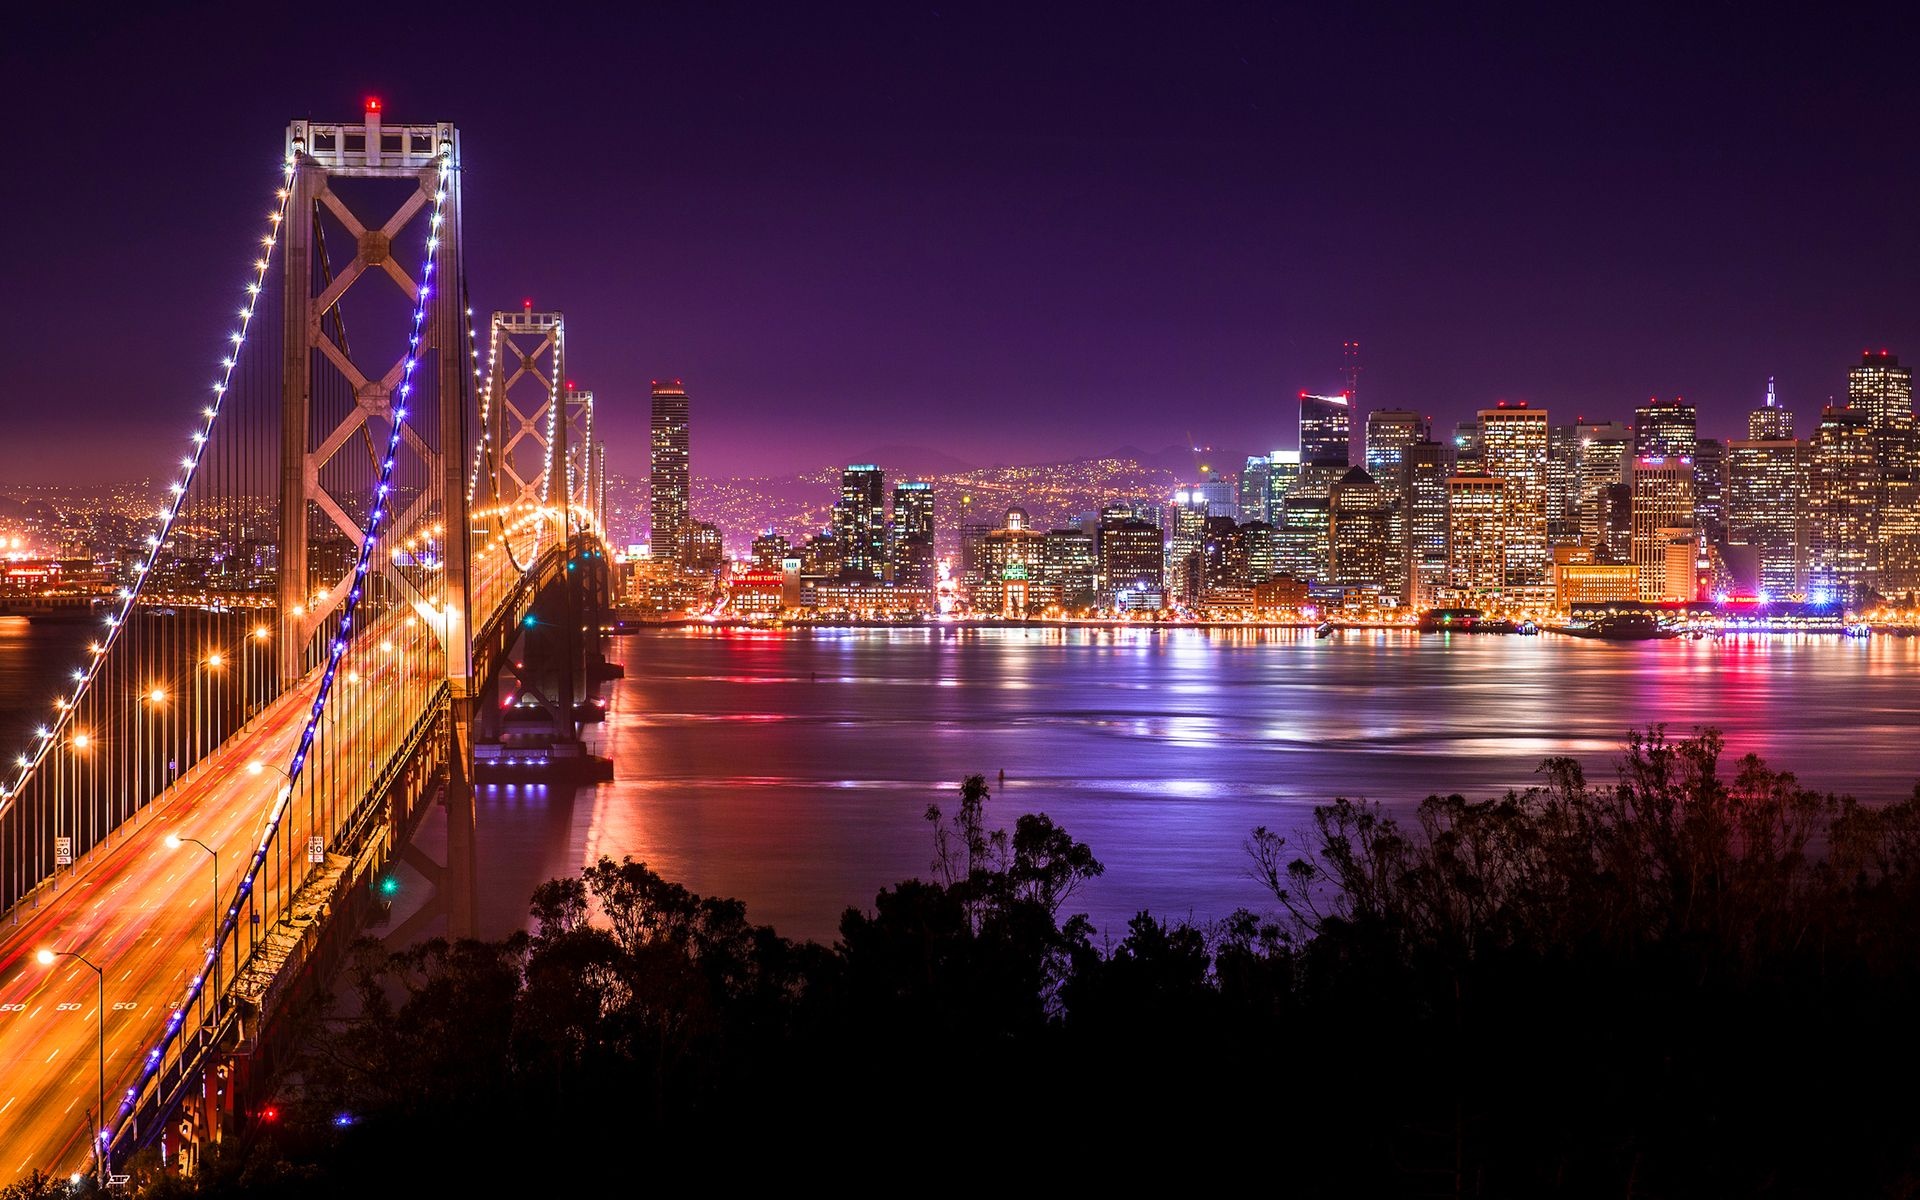 San Francisco: Built on hills, Known for its beautiful views and Victorian-style houses, Night city view. 1920x1200 HD Background.